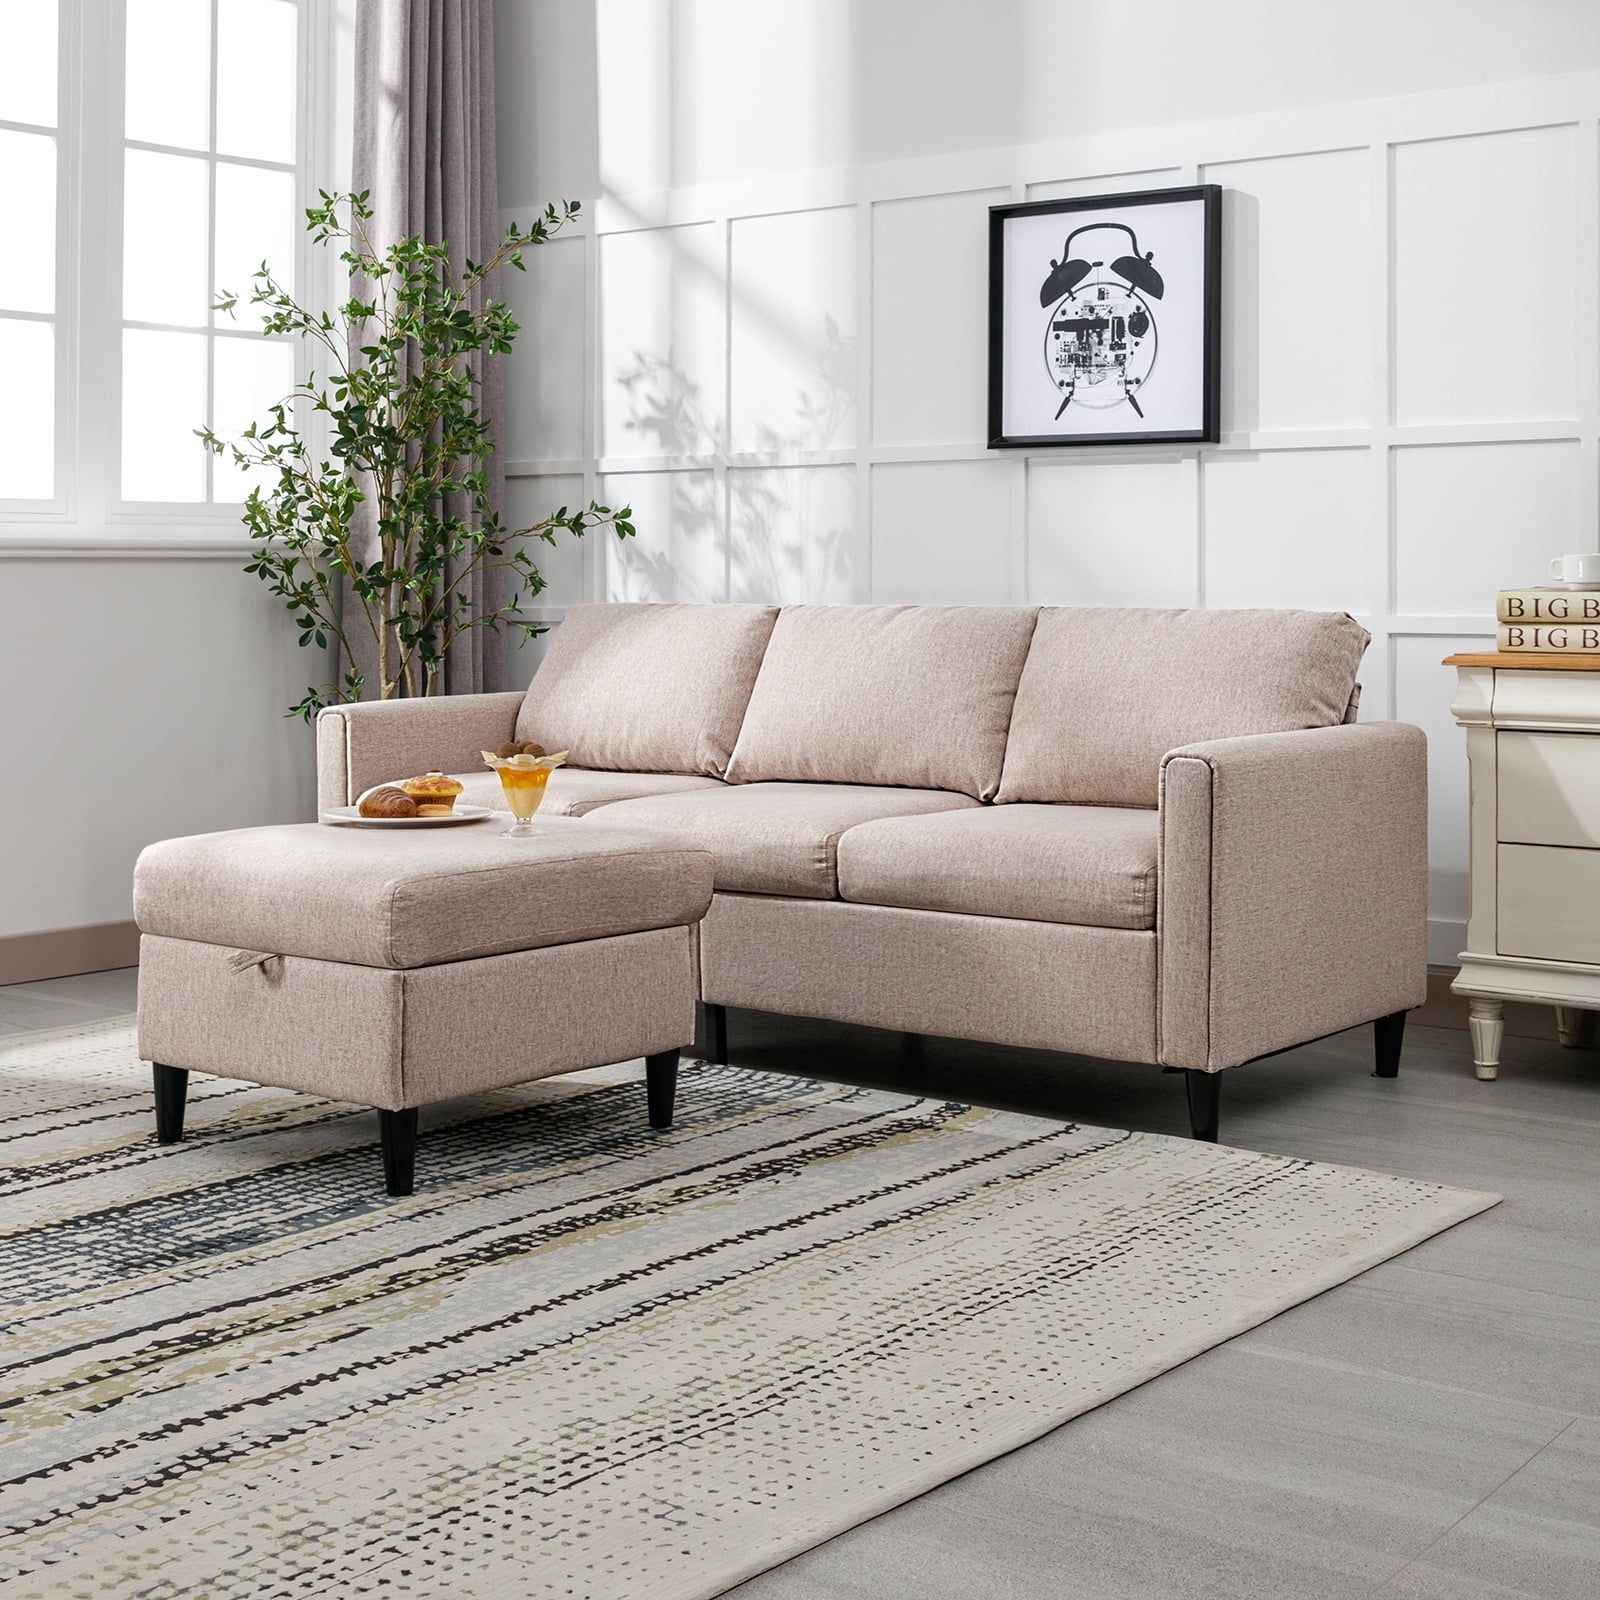 Zafly Convertible Sectional Sofa Couch, 3 Seat Upholstered Sofa With  Flexible Storage Ottoman Chaise, Modern Modular L Shape Couches For Living  Room/office – Beige – Walmart For 3 Seat Convertible Sectional Sofas (View 3 of 15)